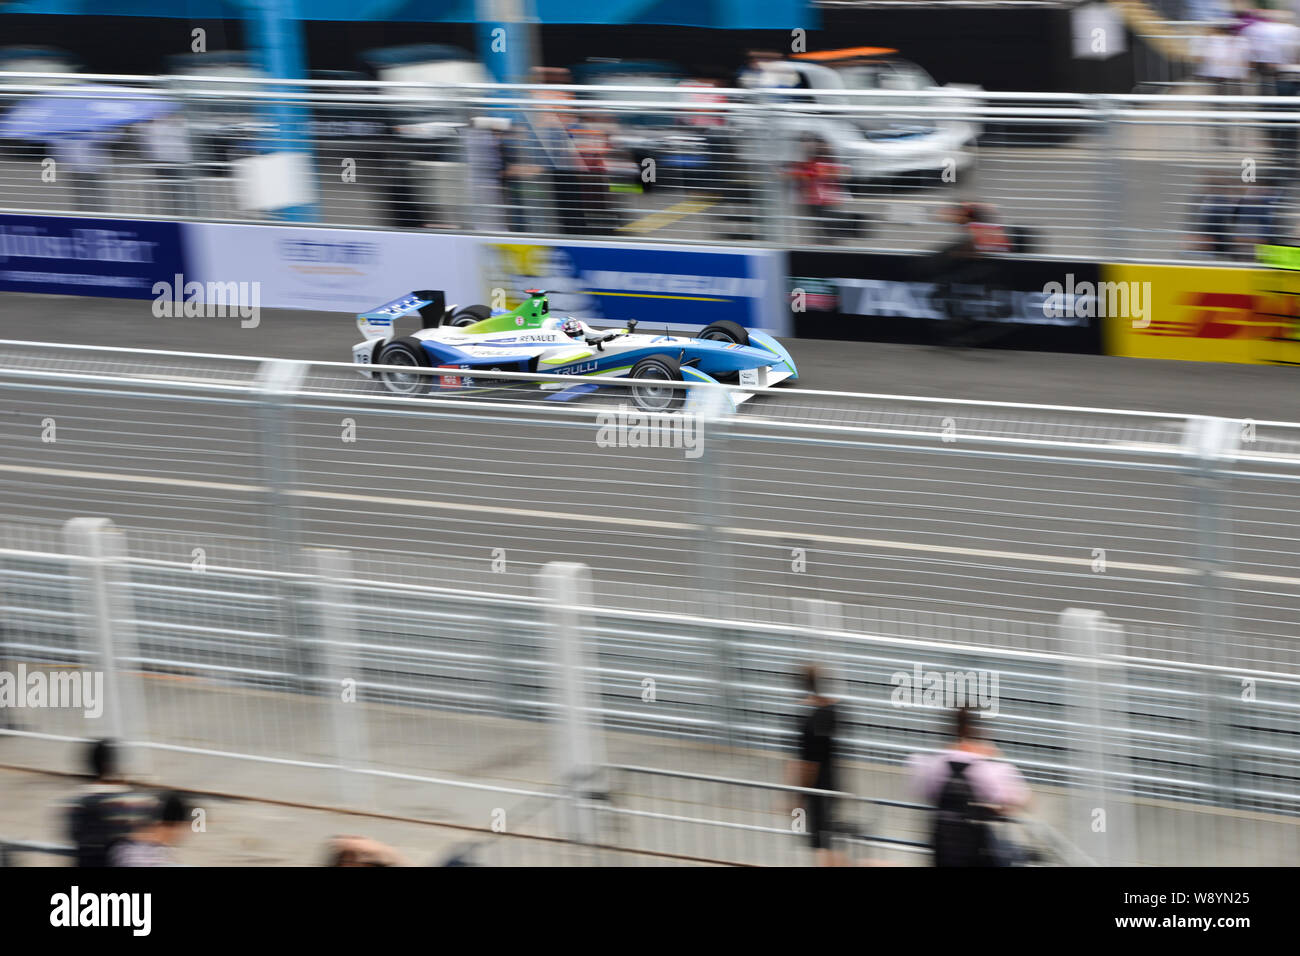 Trulli driver Michela Cerruti of Italy competes during the Formula E all-electric auto race in Beijing, China, 13 September 2014. Stock Photo